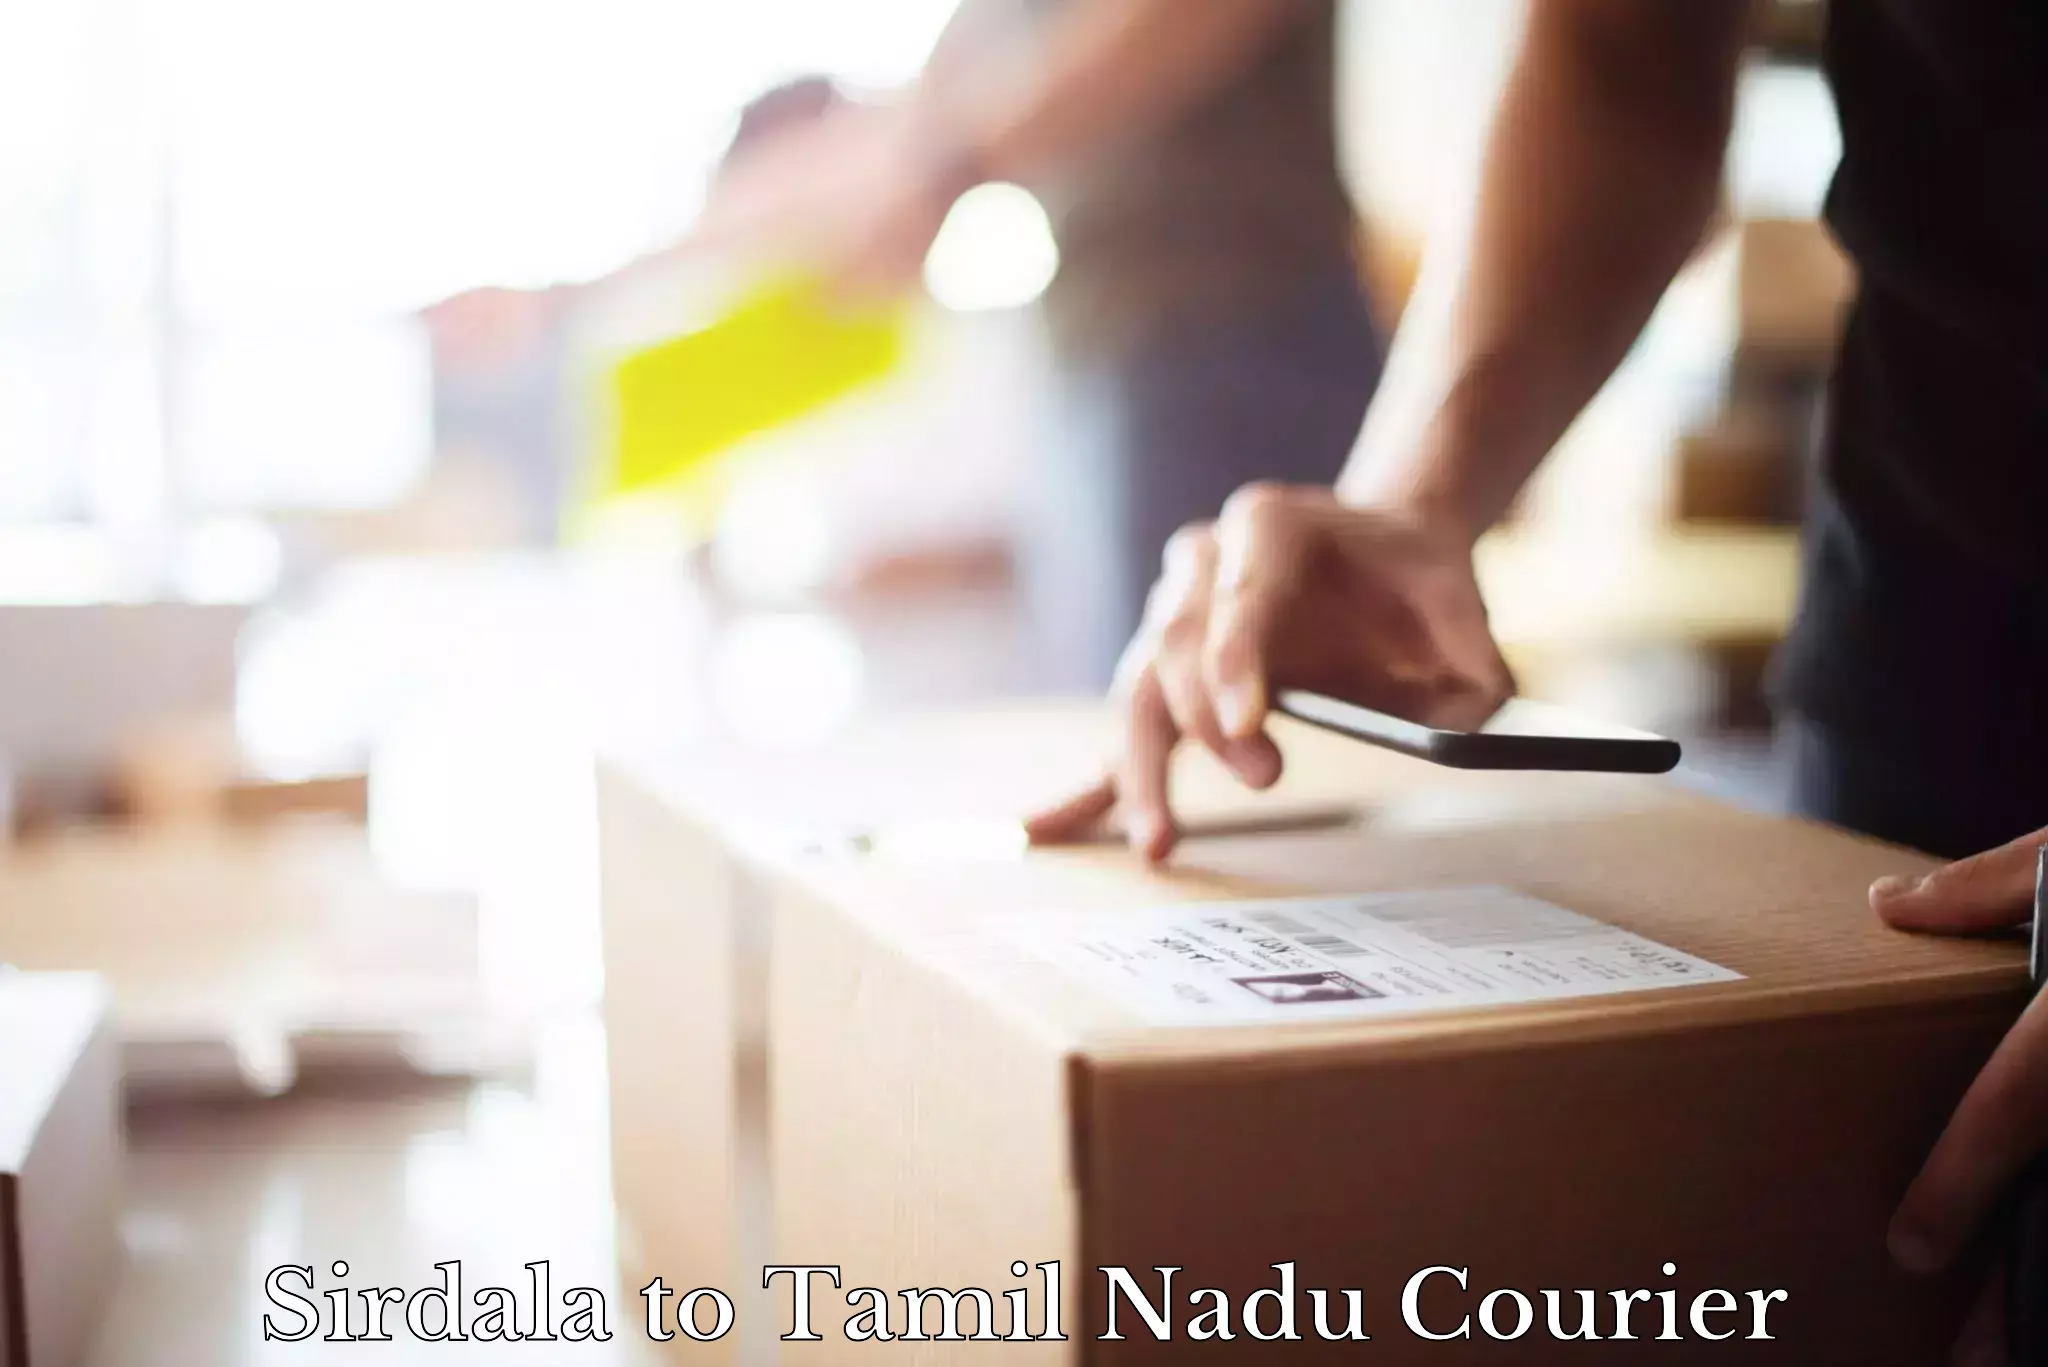 24-hour delivery options Sirdala to Tamil Nadu